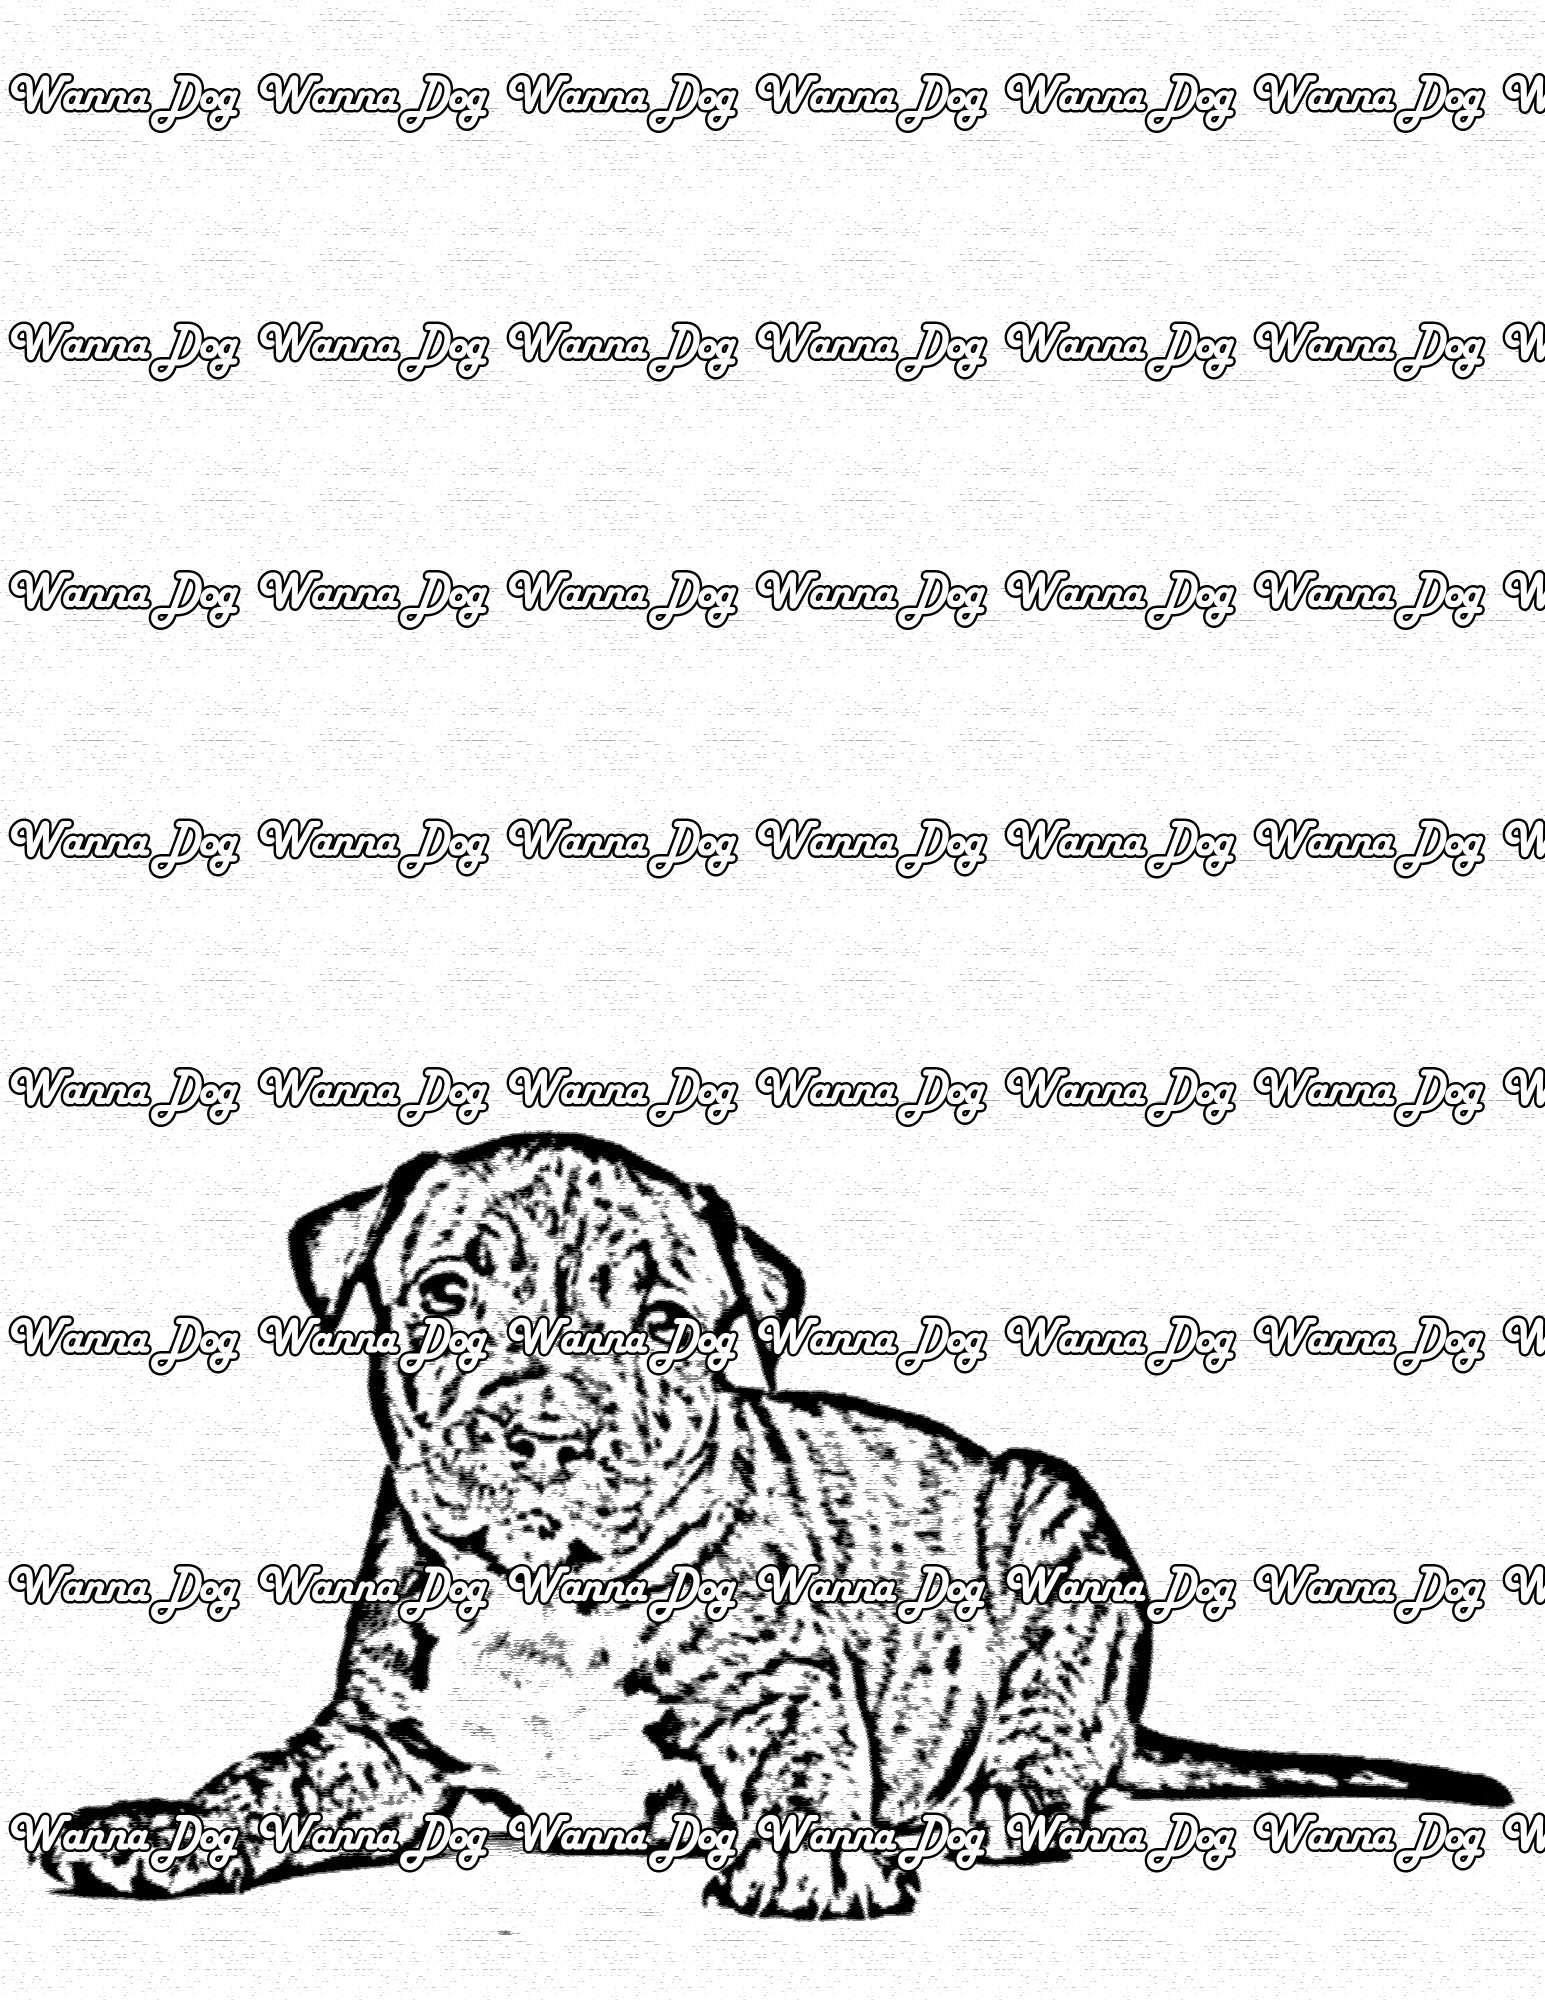 Pitbull Puppy Coloring Page of a Pitbull Puppy sitting down and looking at the camera